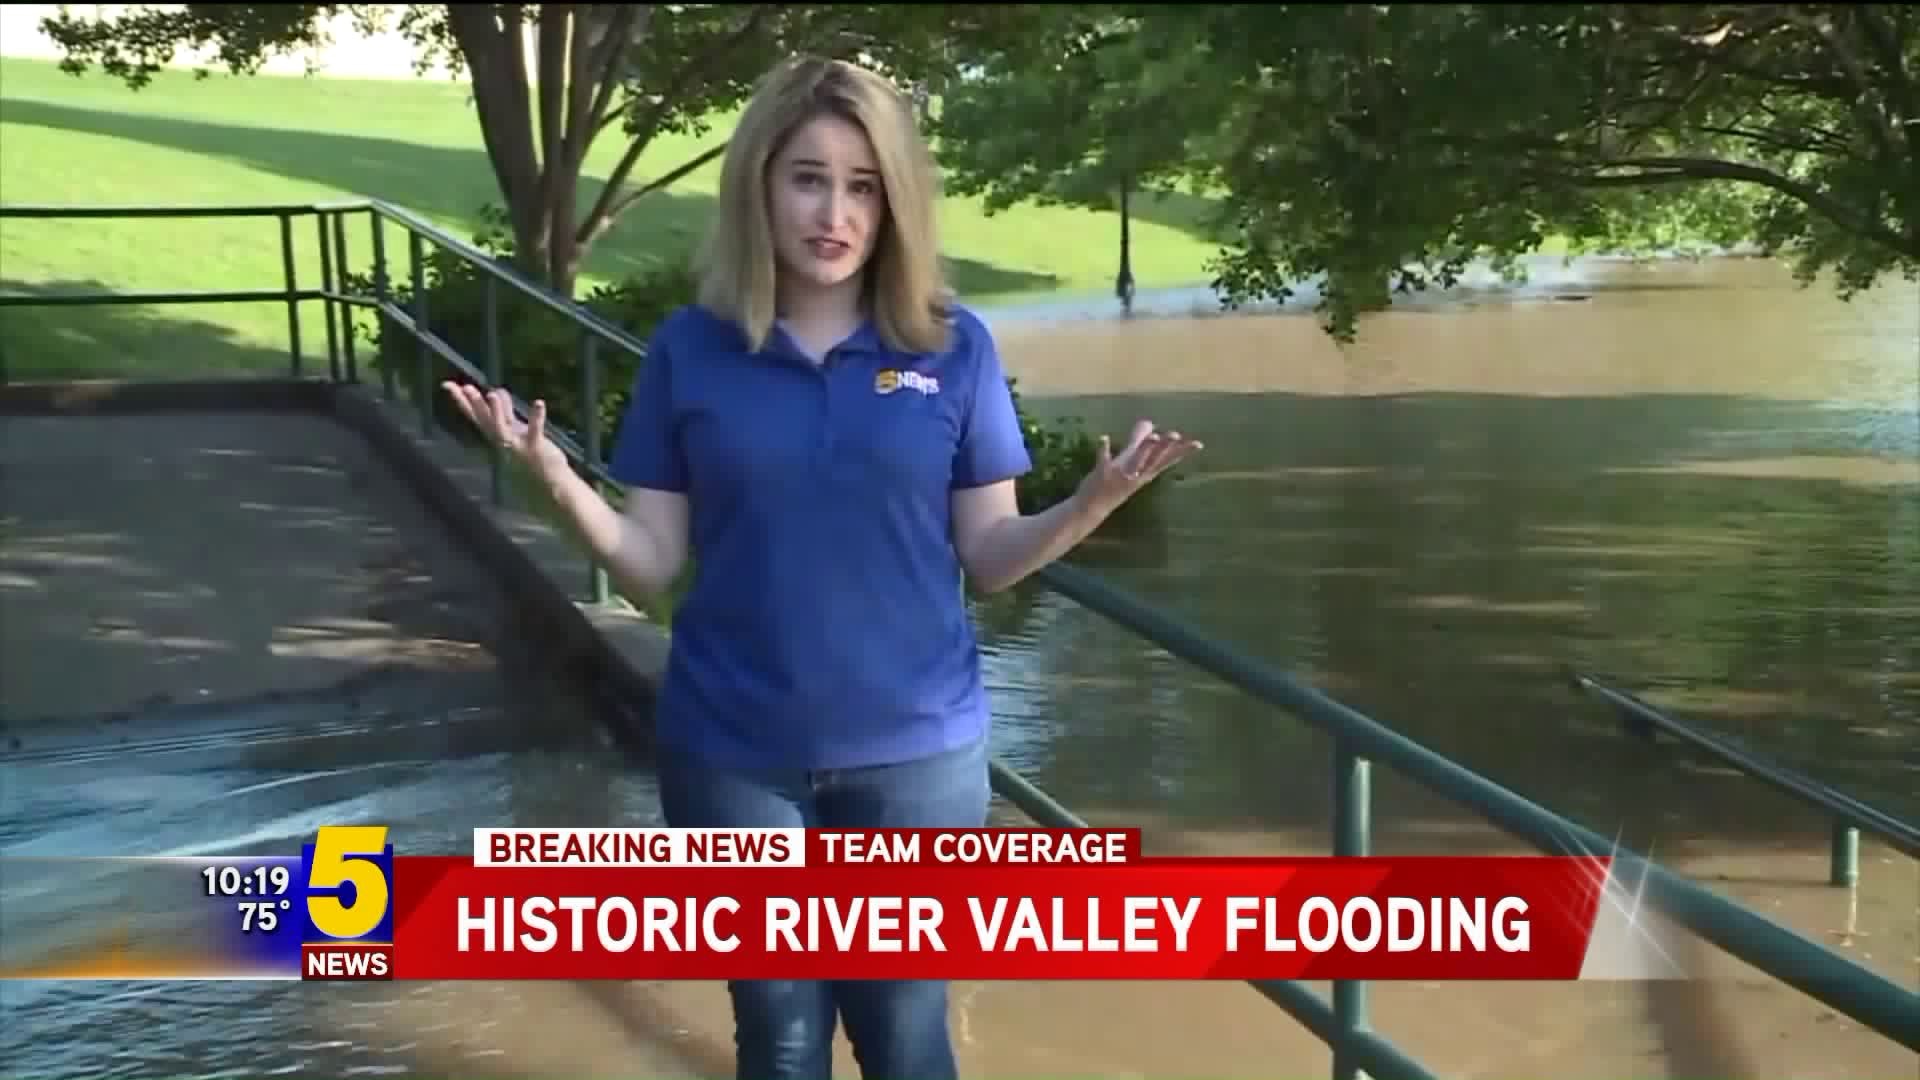 HISTORIC RIVER VALLEY FLOODING